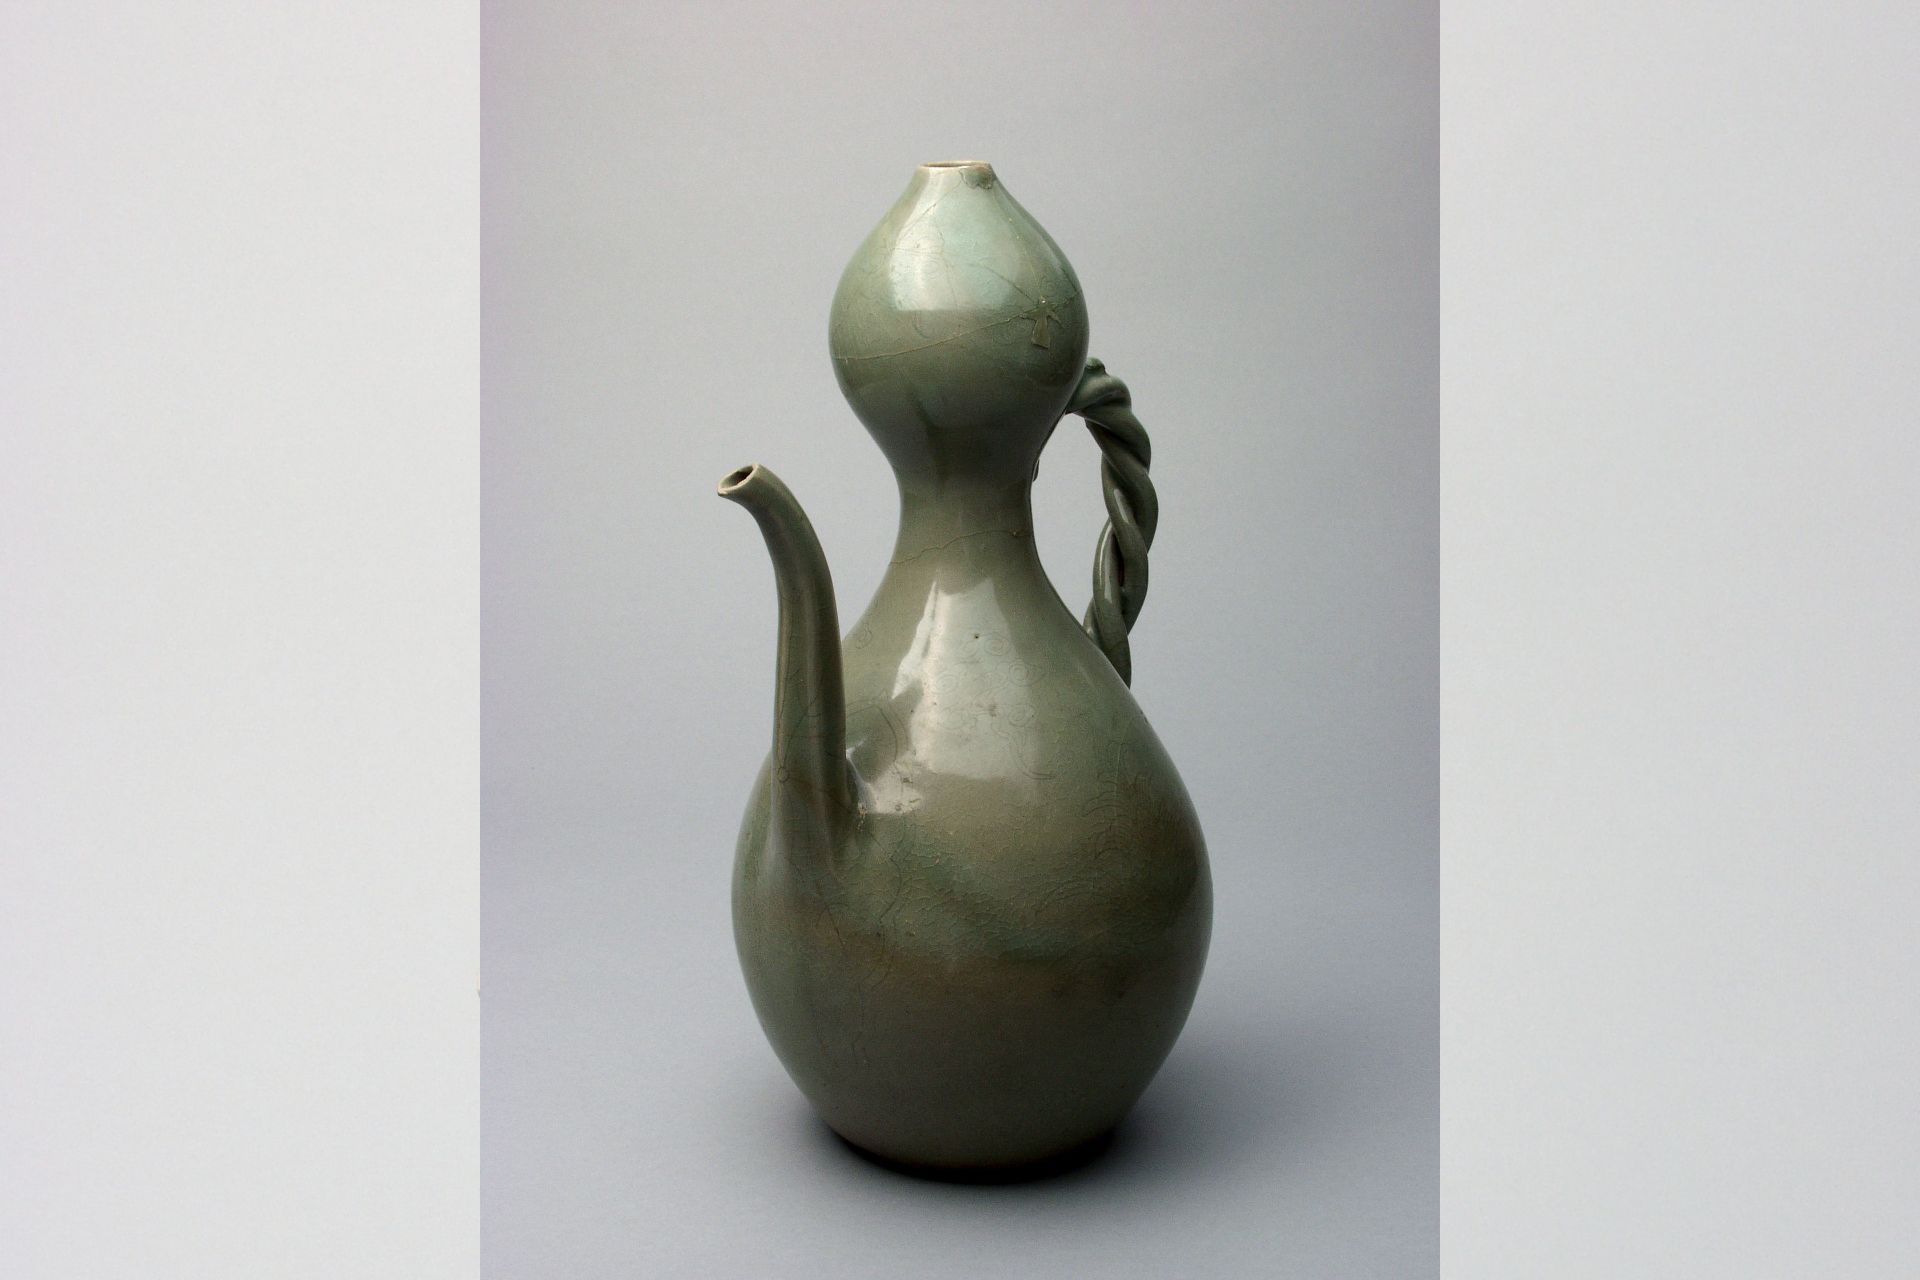 Celadon gourd-shaped ewer from the late Koryo period, 1200-1399 CE